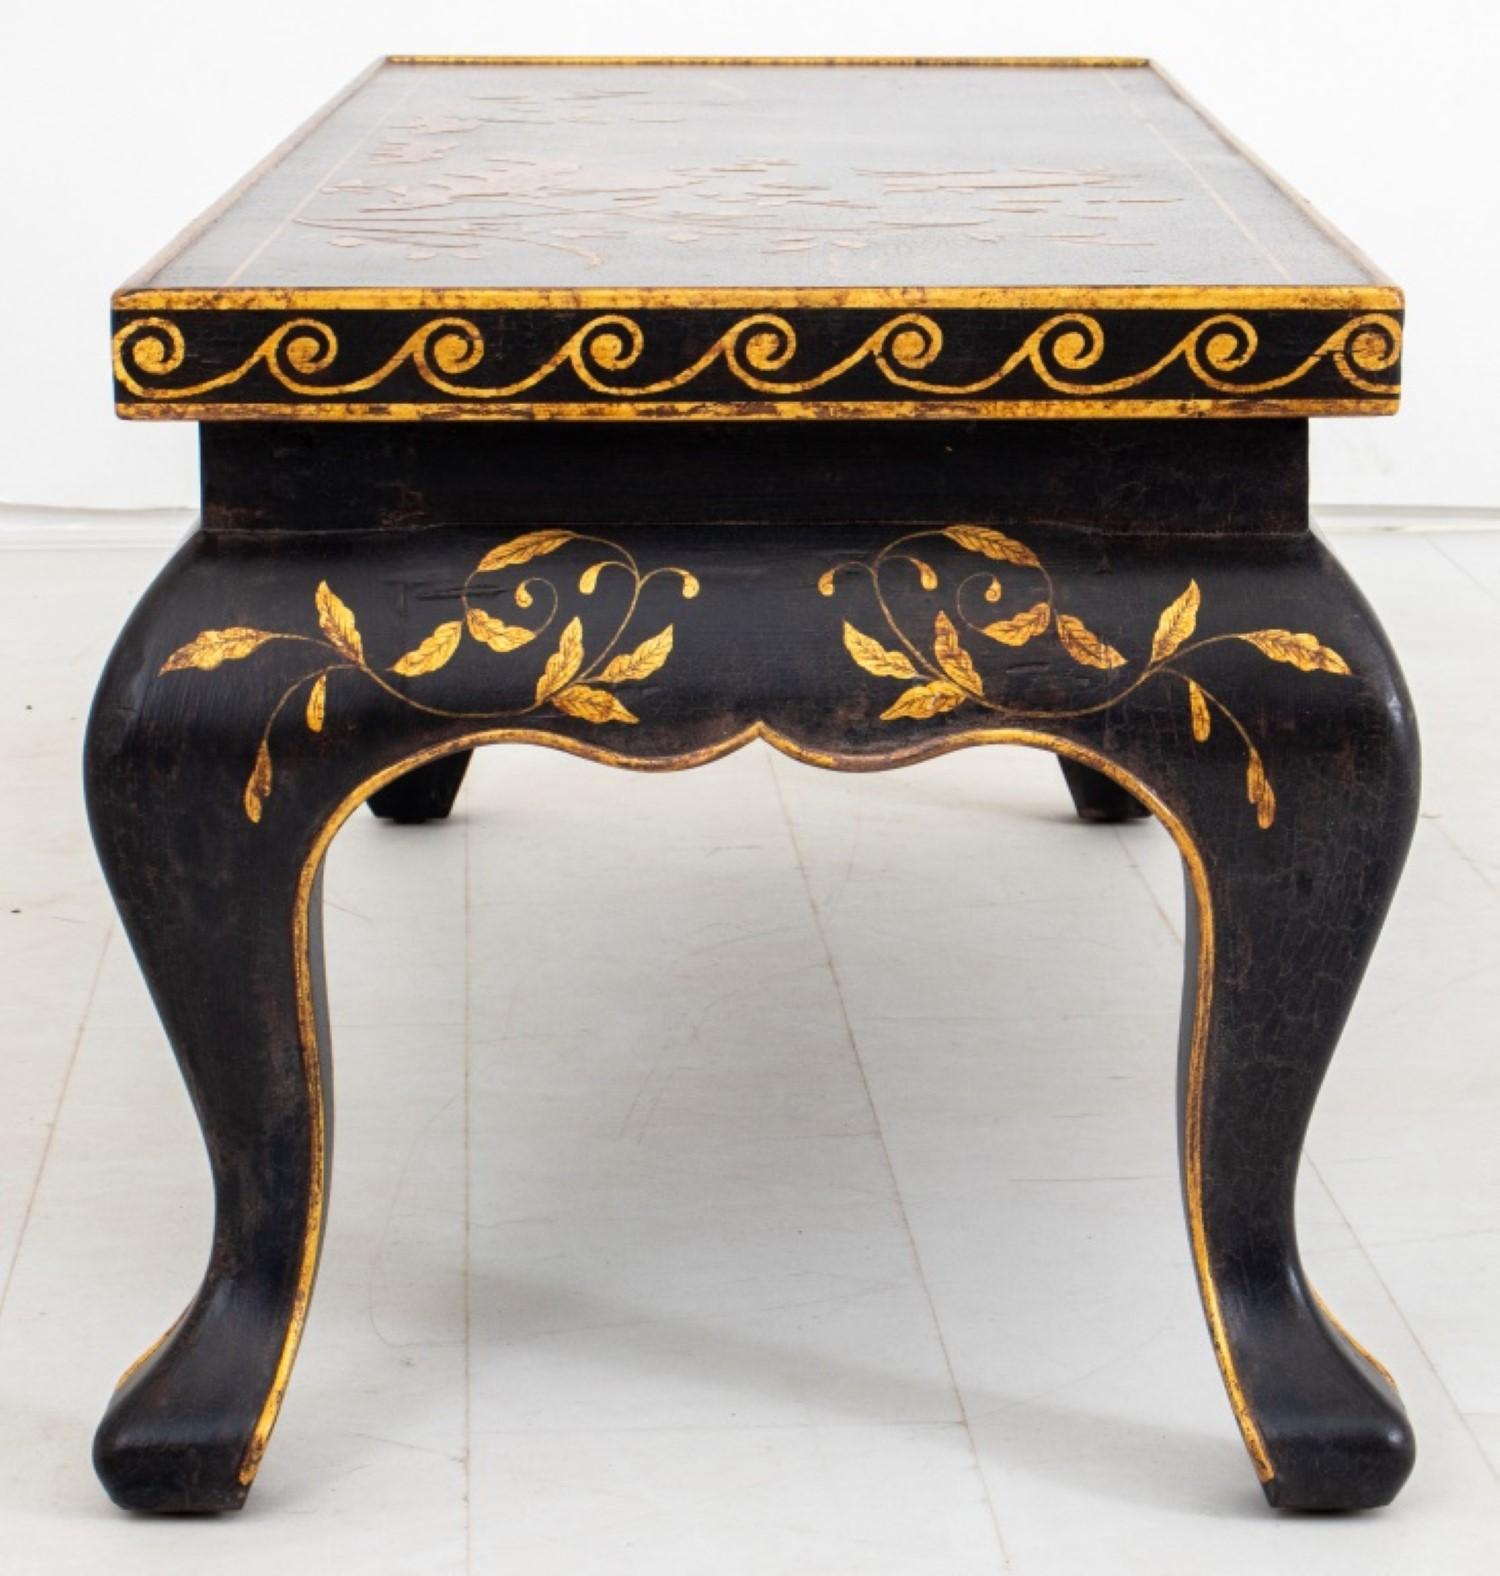 Chinese ebonized and gilt wood coffee or cocktail table with intricate design elements:

Style: Chinese, potentially incorporating influences from Ming or Qing Dynasty styles.

Materials:

Ebonized wood: Wood treated to achieve a black color, often